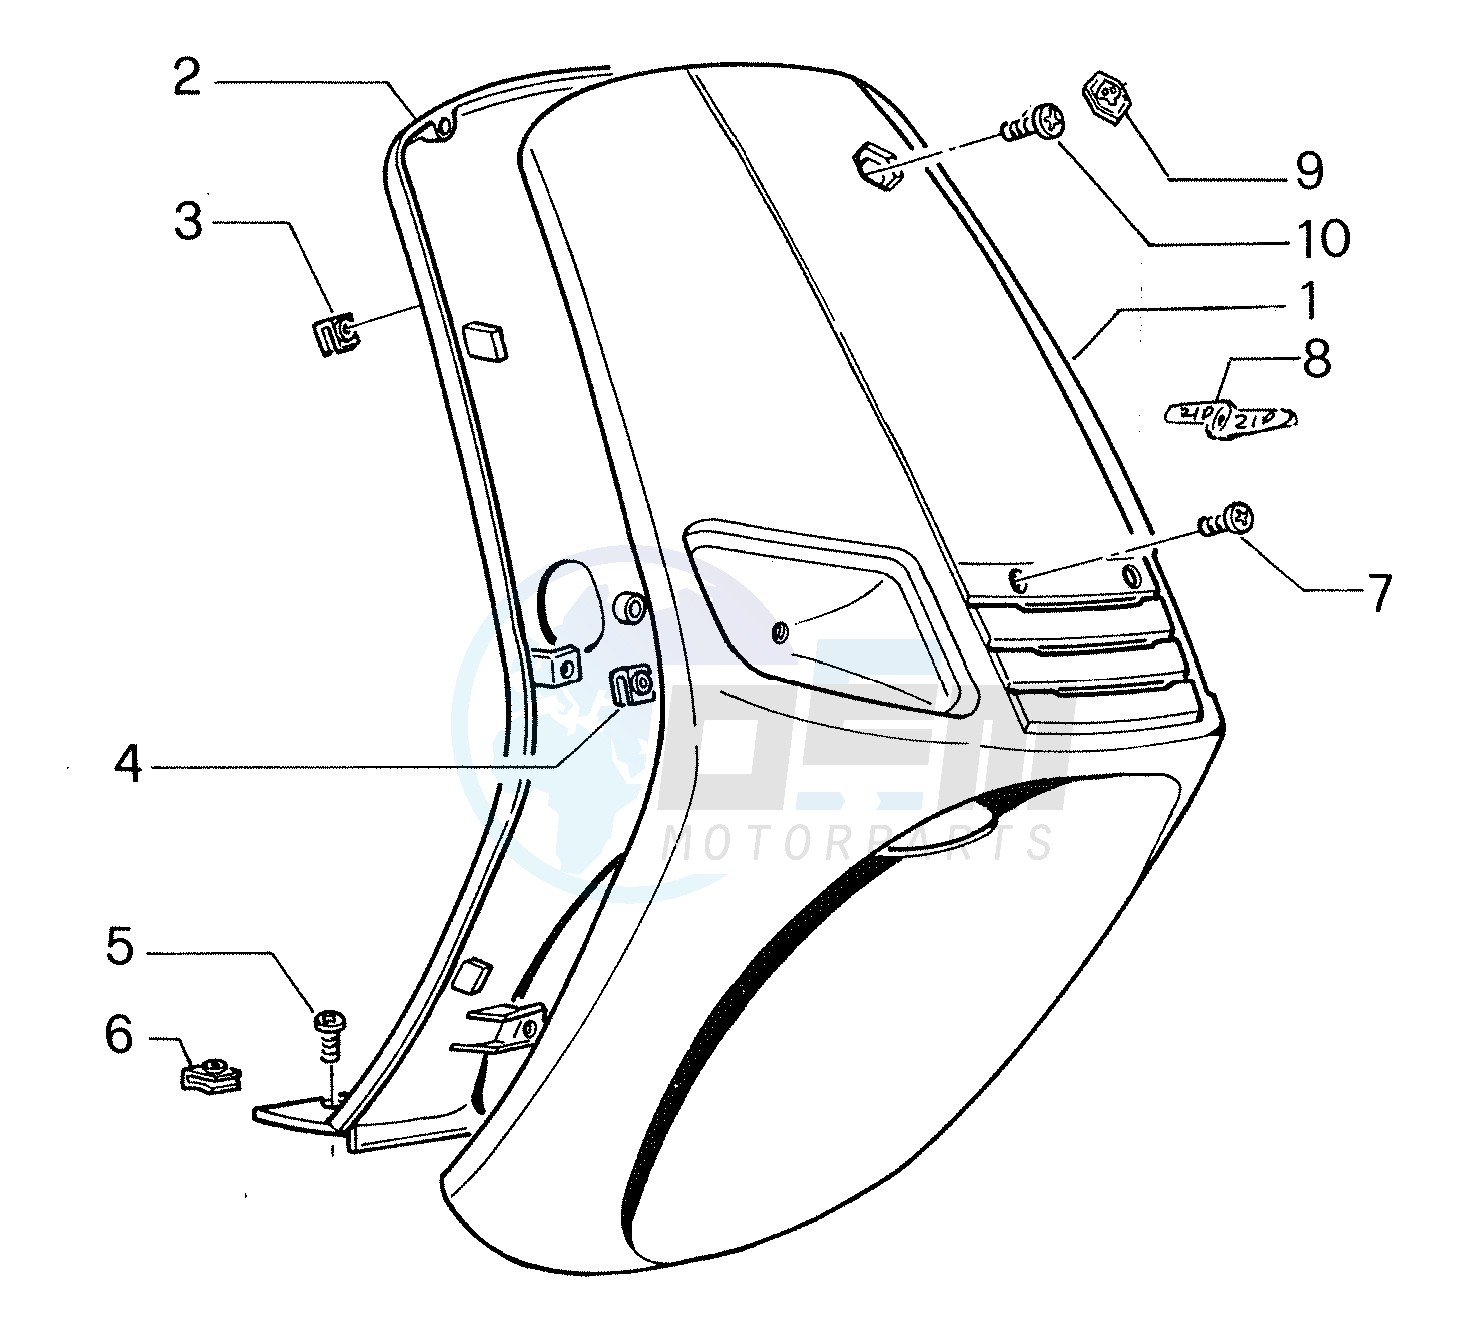 Front shield image